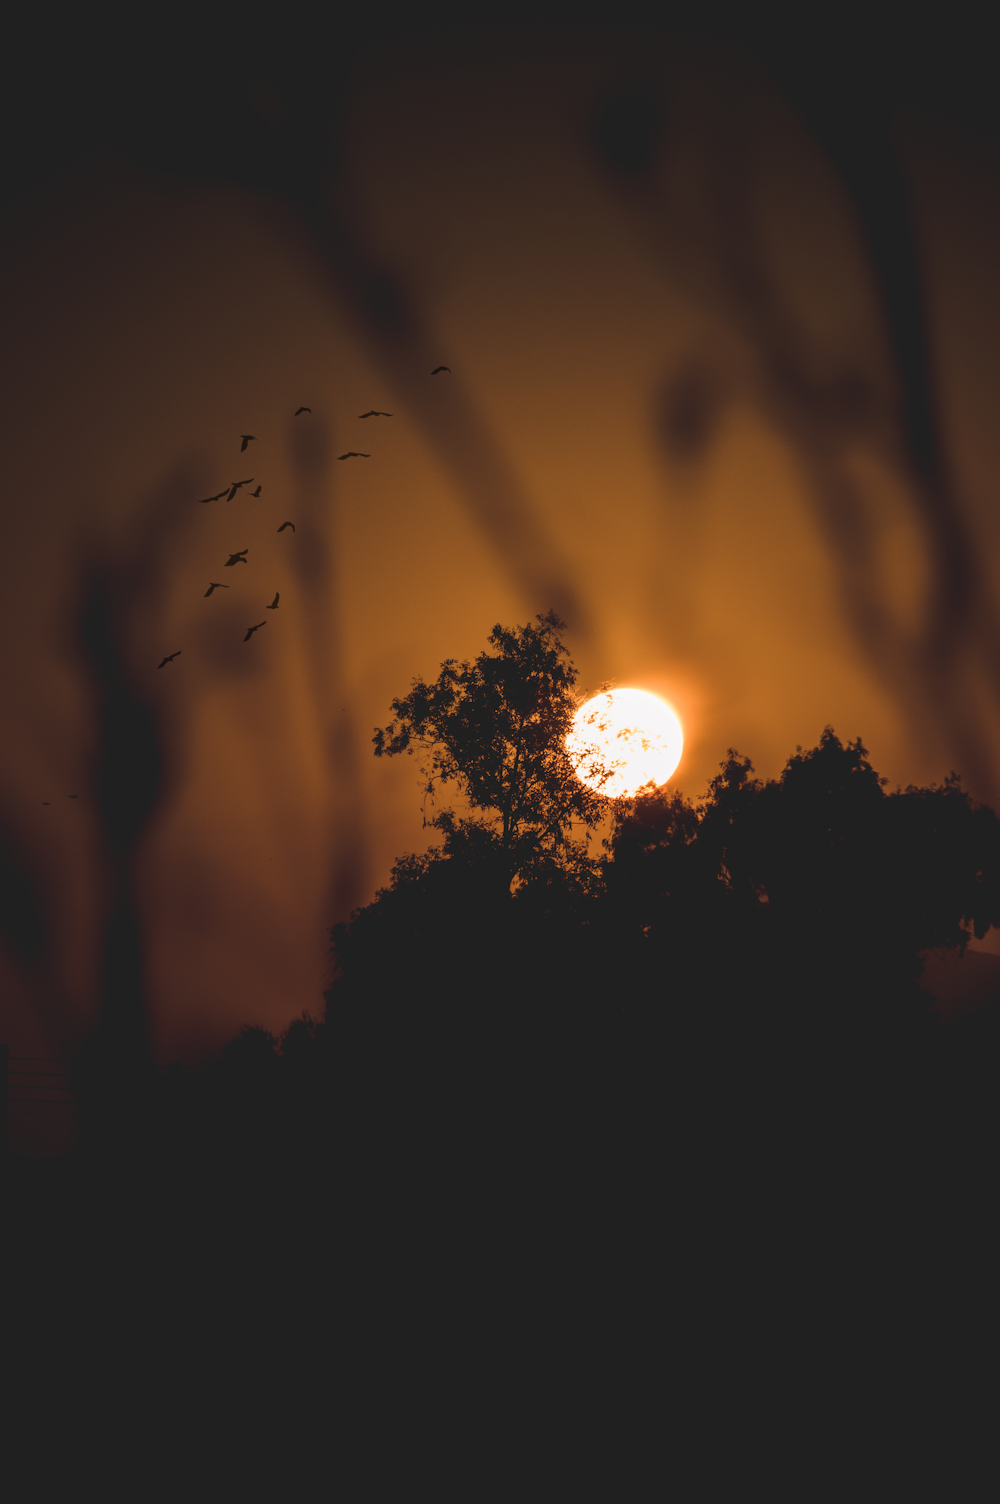 selective focus photography of full moon